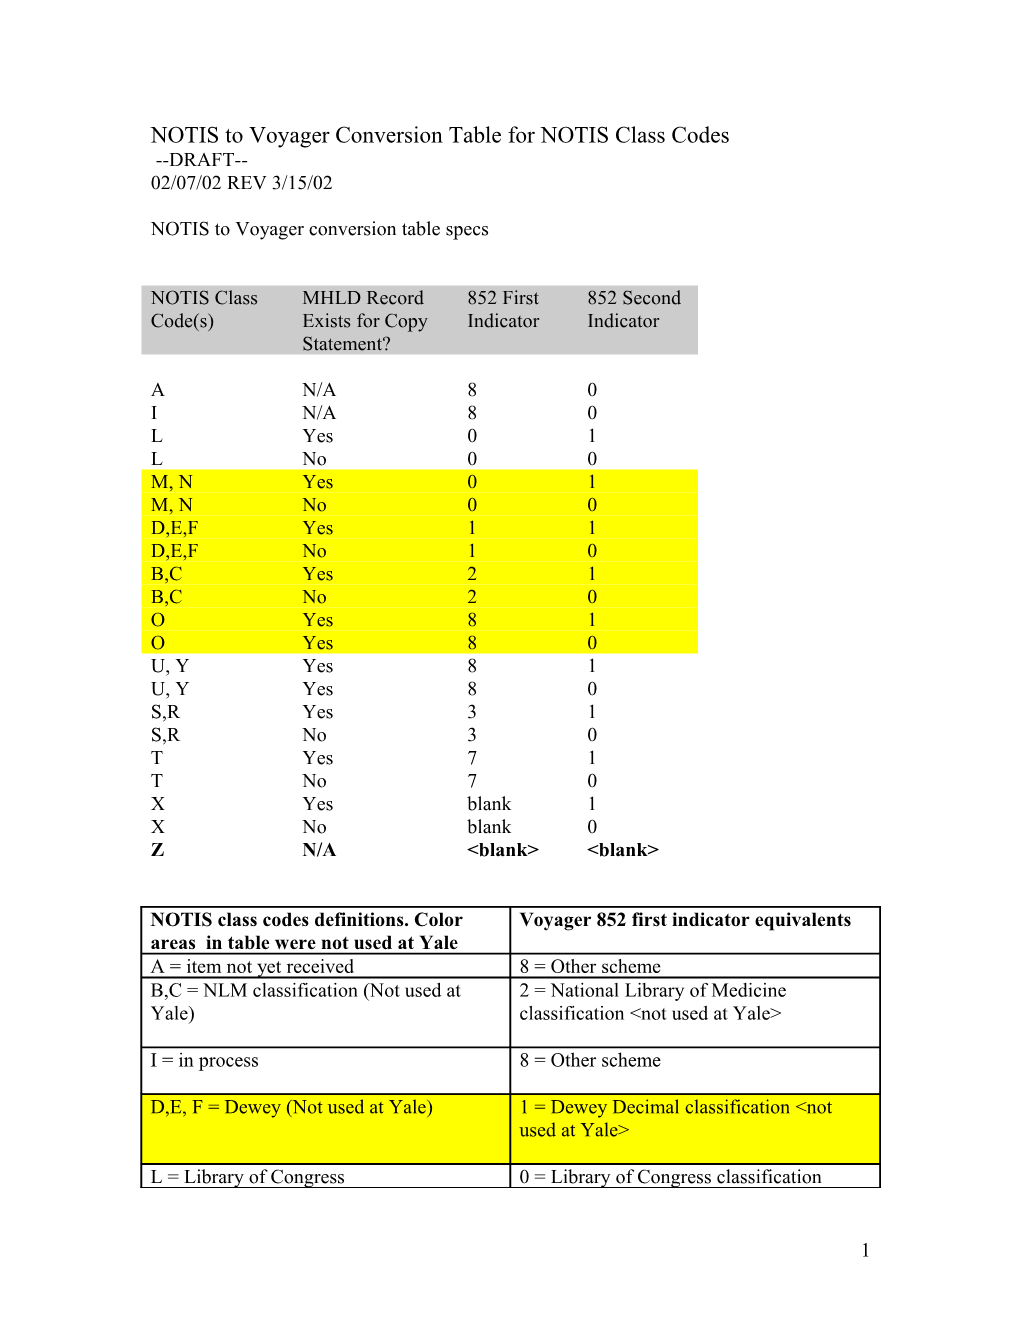 NOTIS-Voyager Comparison Table for MFHD Class Codes